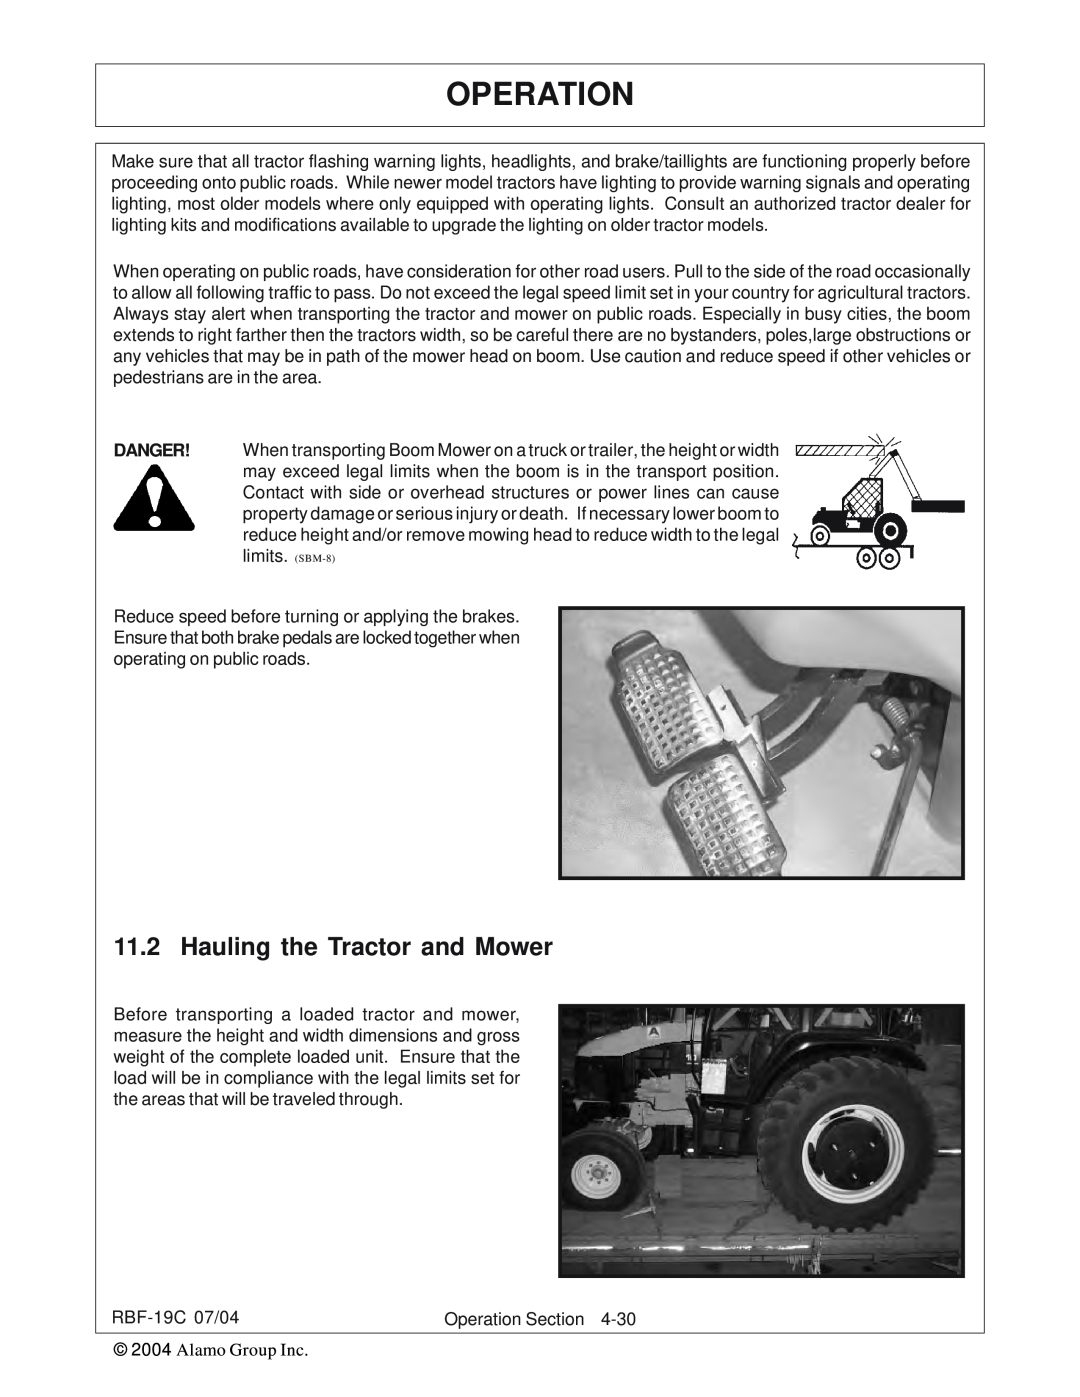 Tiger RBF-19C manual Operation, Hauling the Tractor and Mower 